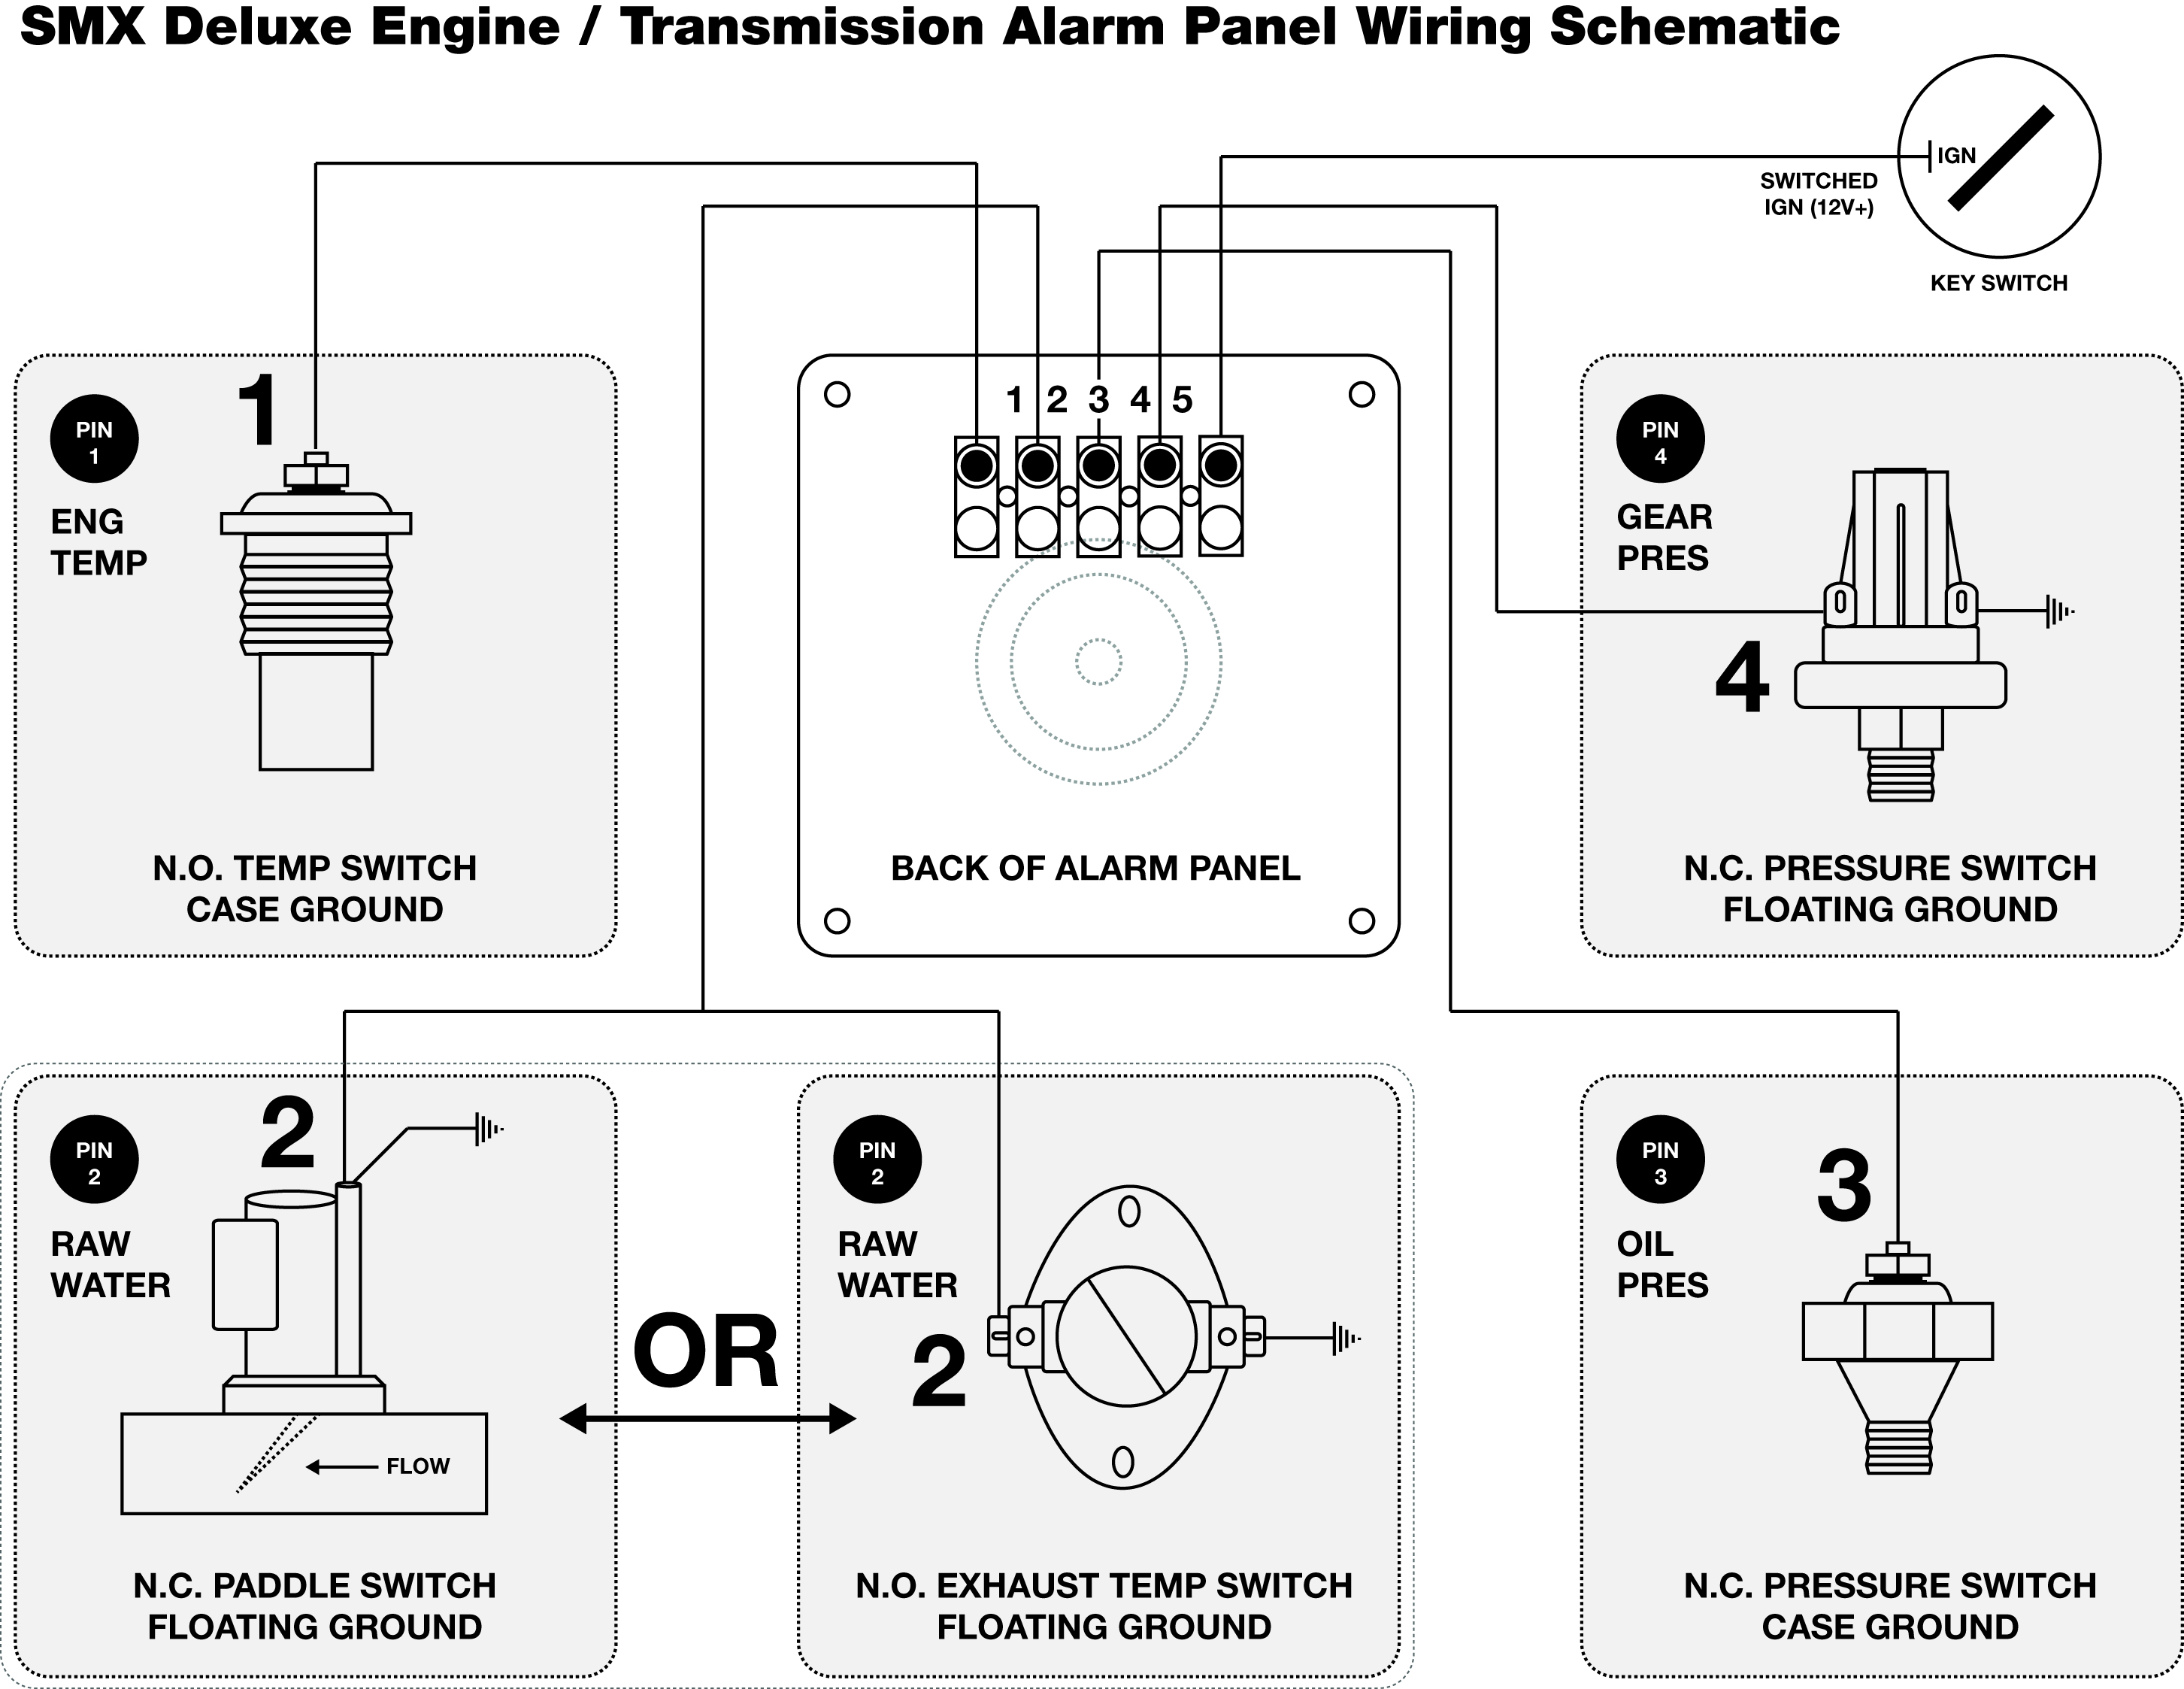 SMX Deluxe Engine Transmission Alarm Panel Wiring